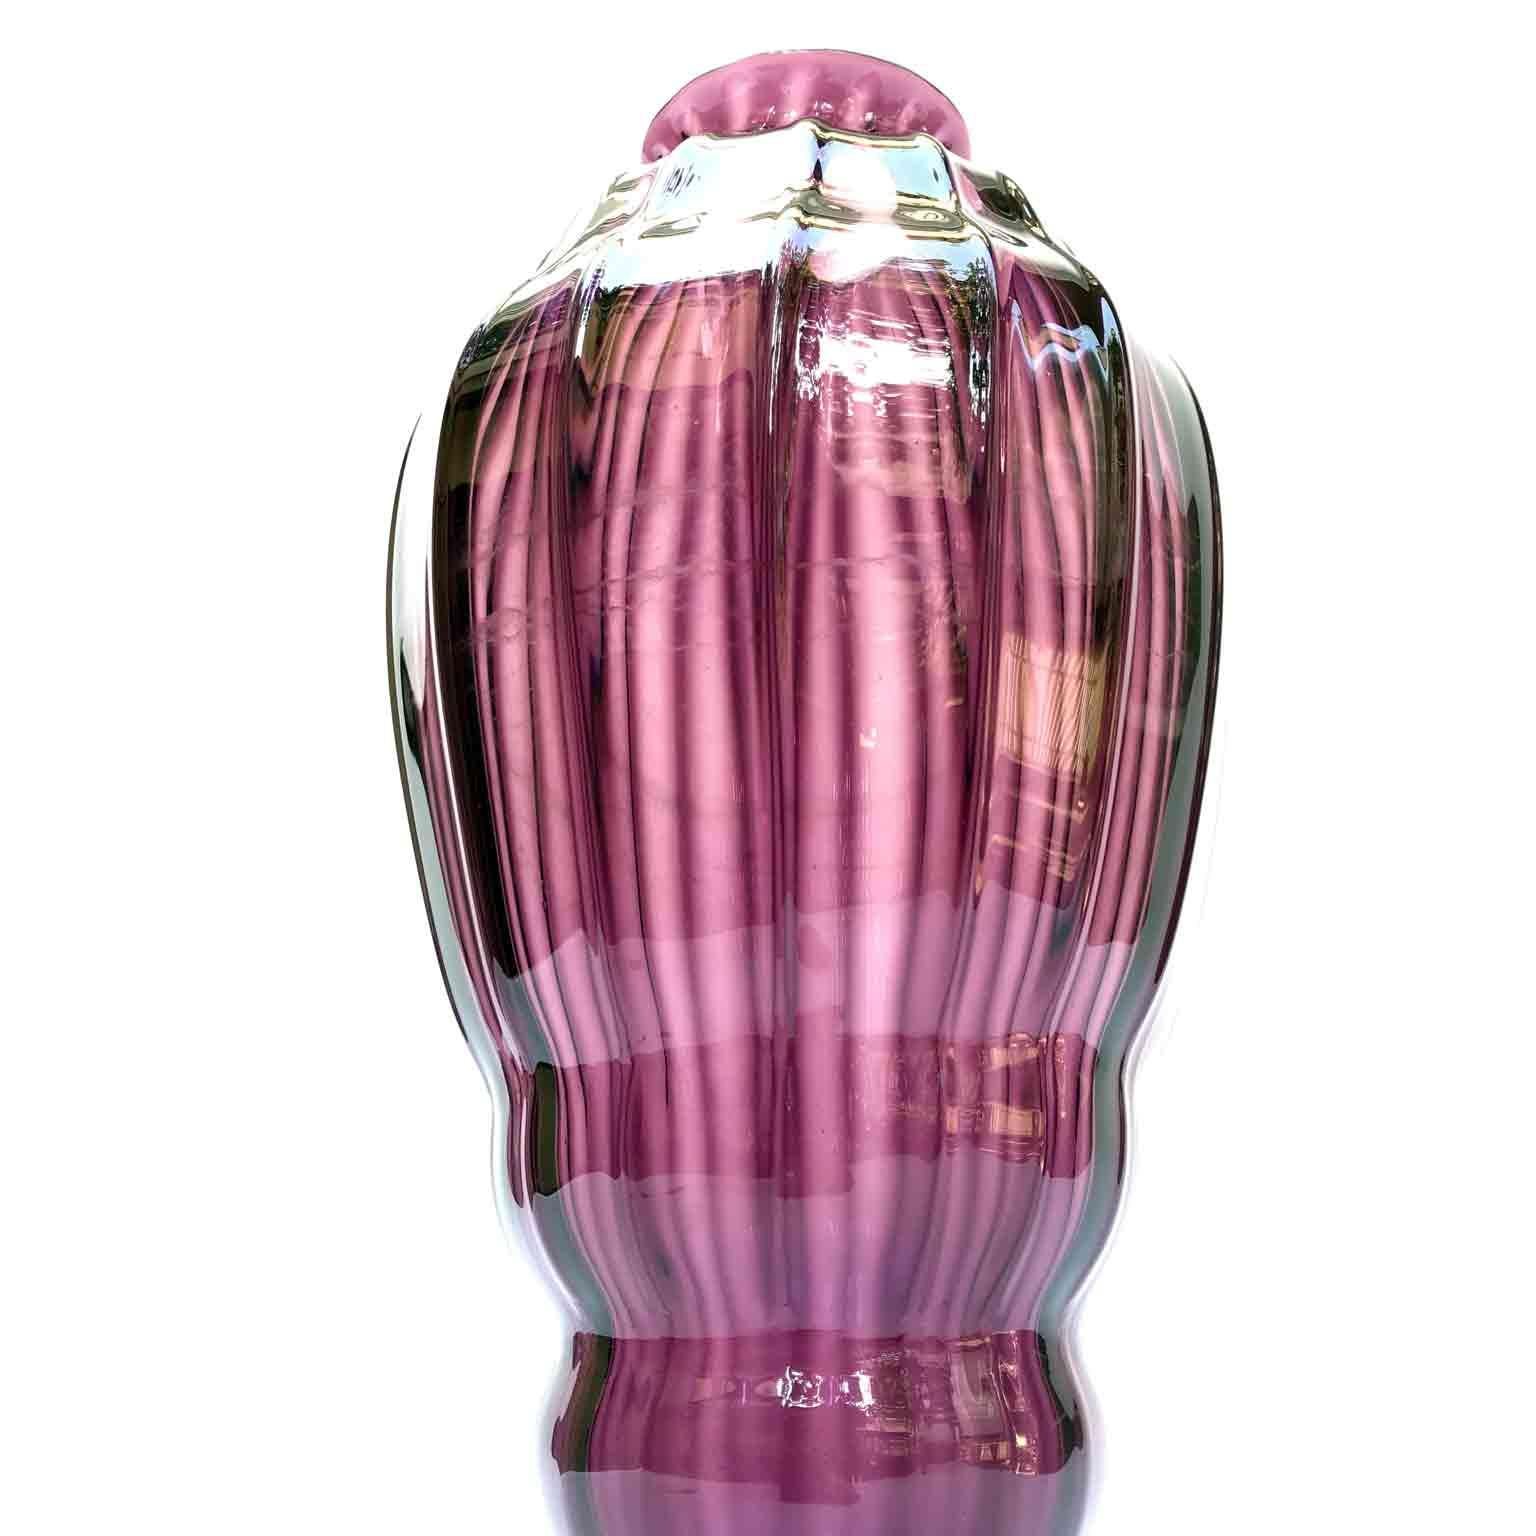 20th century Italian blown glass vase with amethyst colored circular body, fine vertical rib decoration and resting on a circular base. Unsigned.

The body of this antique Venetian violet glass vase has an unusual shaped form. 
It comes from a